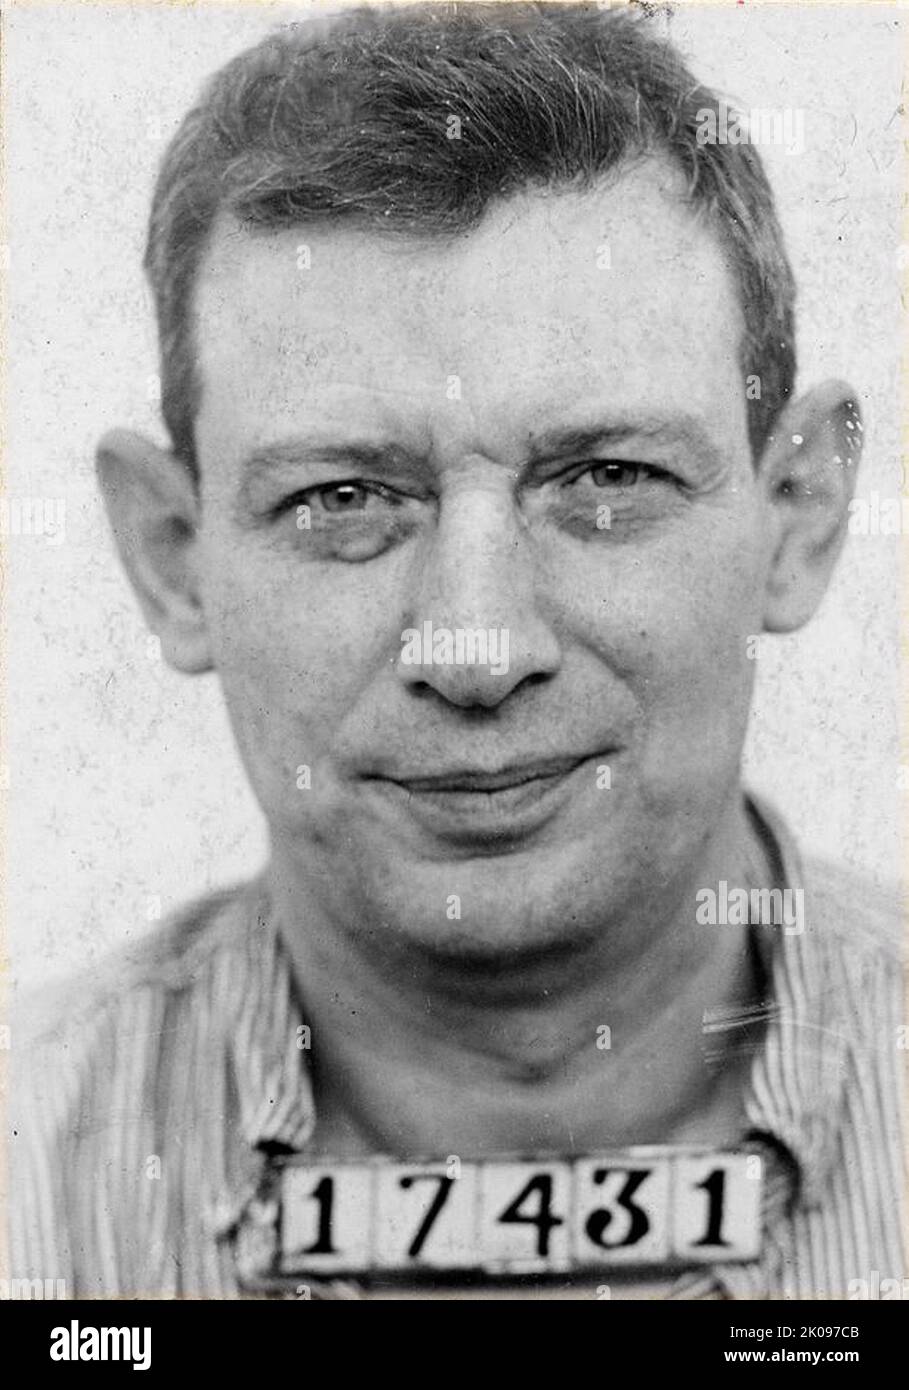 Robert Franklin Stroud (January 28, 1890 - November 21, 1963), known as the 'Birdman of Alcatraz', was a convicted murderer, American federal prisoner and author who has been cited as one of the most notorious criminals in the United States. During his time at Leavenworth Penitentiary, he reared and sold birds and became a respected ornithologist. From 1942 to 1959, he was incarcerated at Alcatraz, Stroud was never released from the federal prison system. Stock Photo